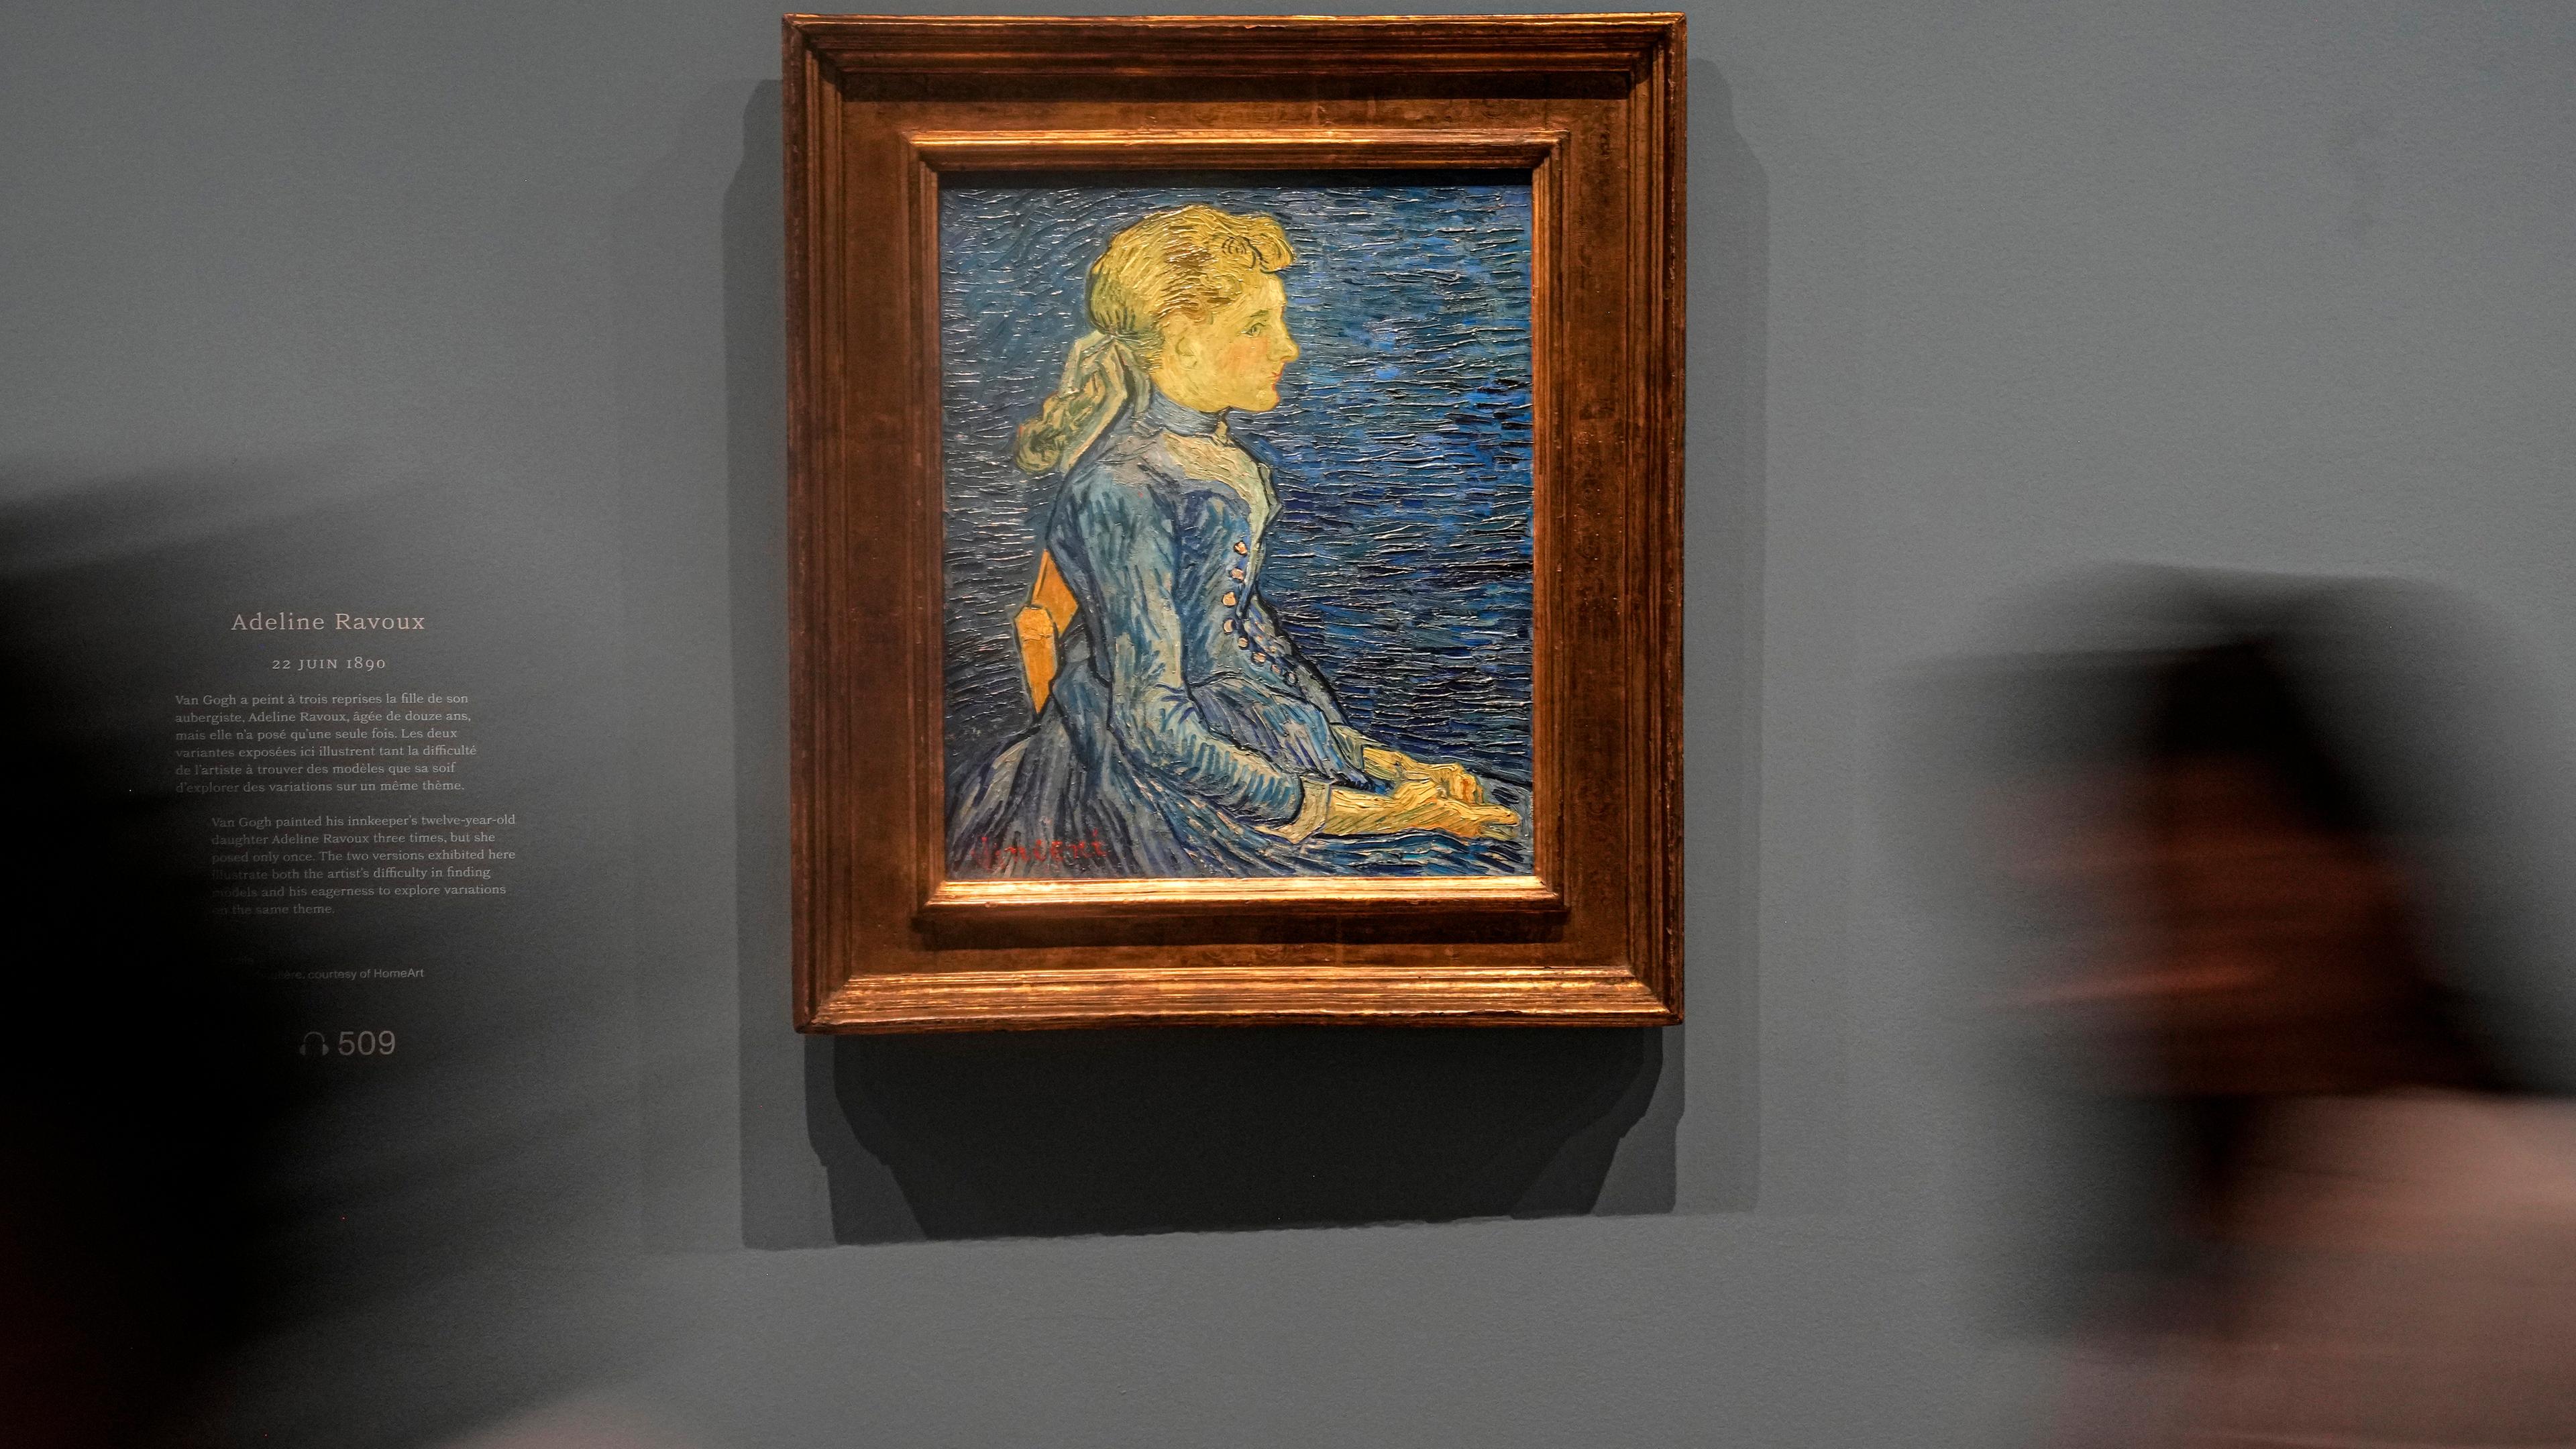 People walk past Vincent Van Gogh's oil on canvas painting "Adeline Ravoux", painted on June 22, 1890, during the press day at the "Van Gogh in Auvers-sur-Oise: The Final Months" exhibition at the Musee d'Orsay in Paris, Friday, Sept. 29, 2023.